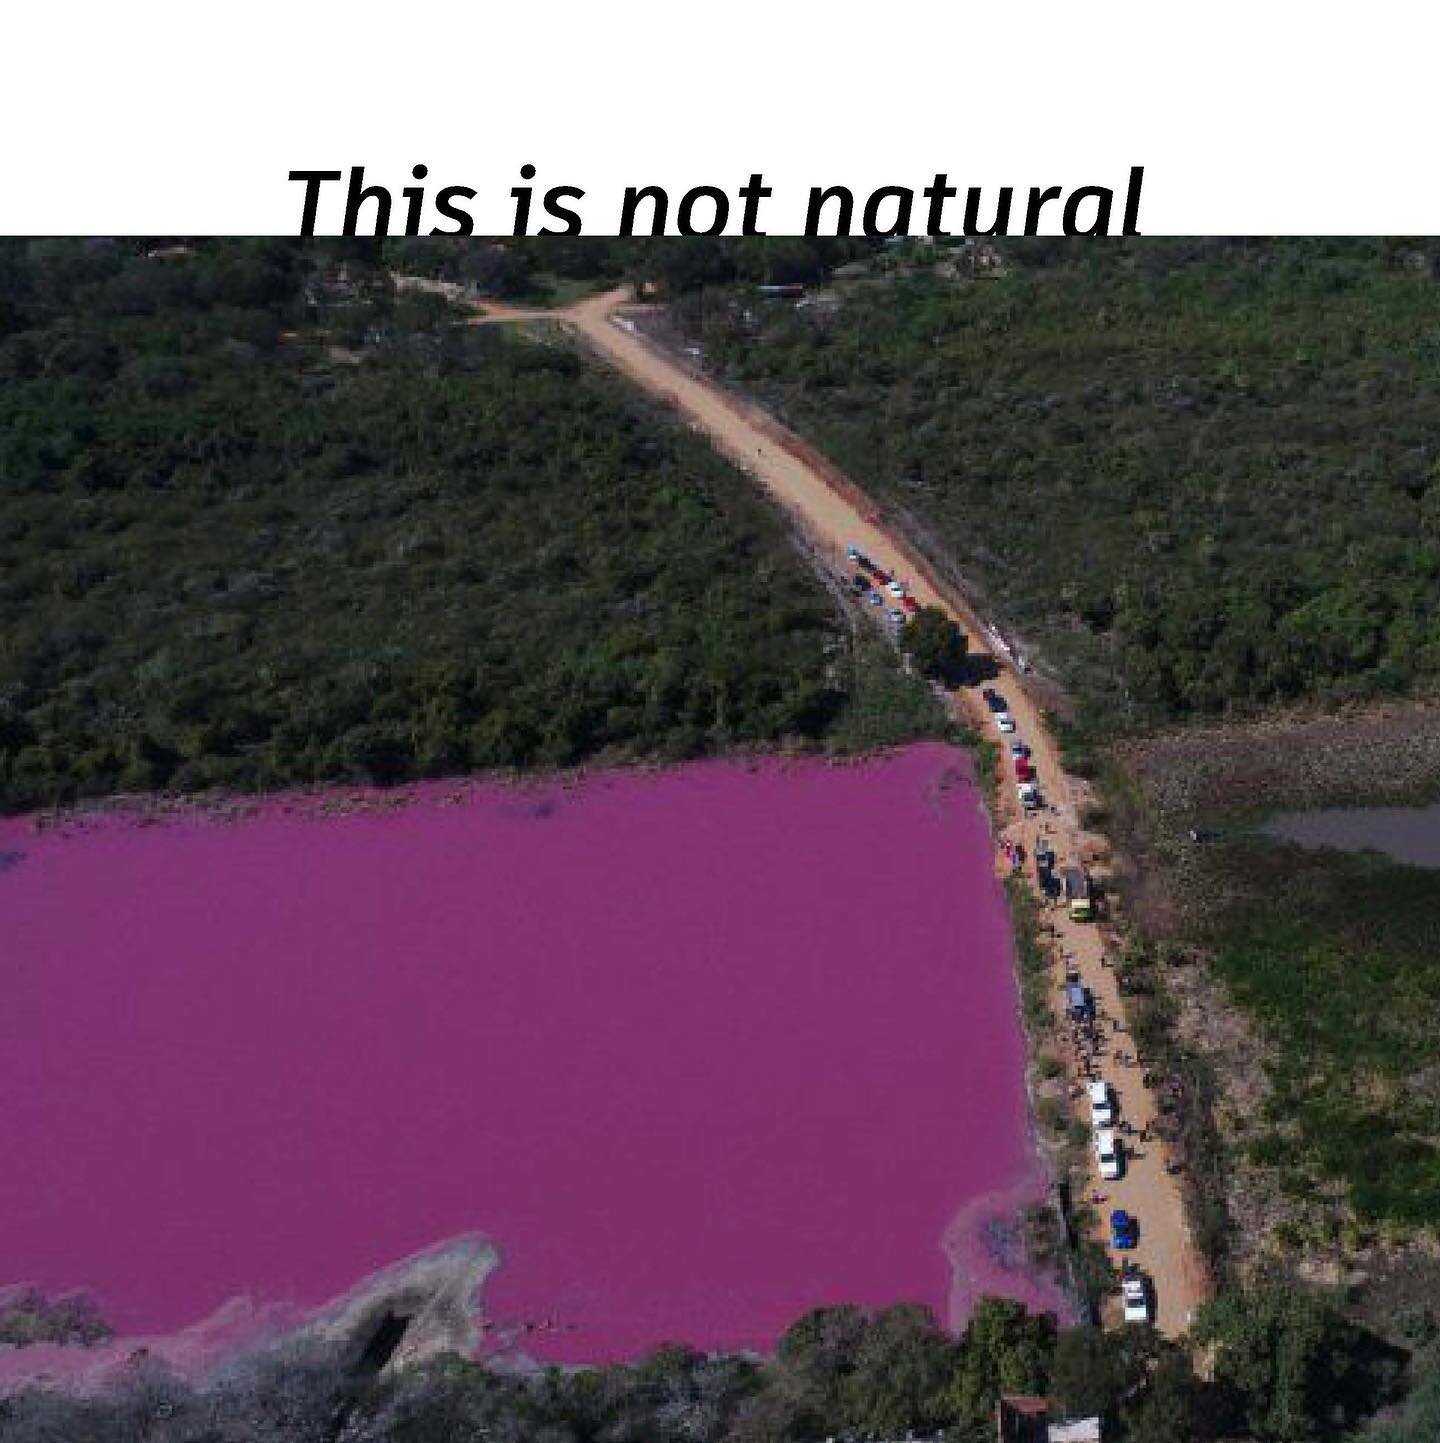 This is the Cerro Lagoon in Paraguay after being polluted by a close-by leather tannery factory. The water at the right is pink due to the heavy chromium content caused by tanning. This pollution had an environmental, cultural and social impact as th